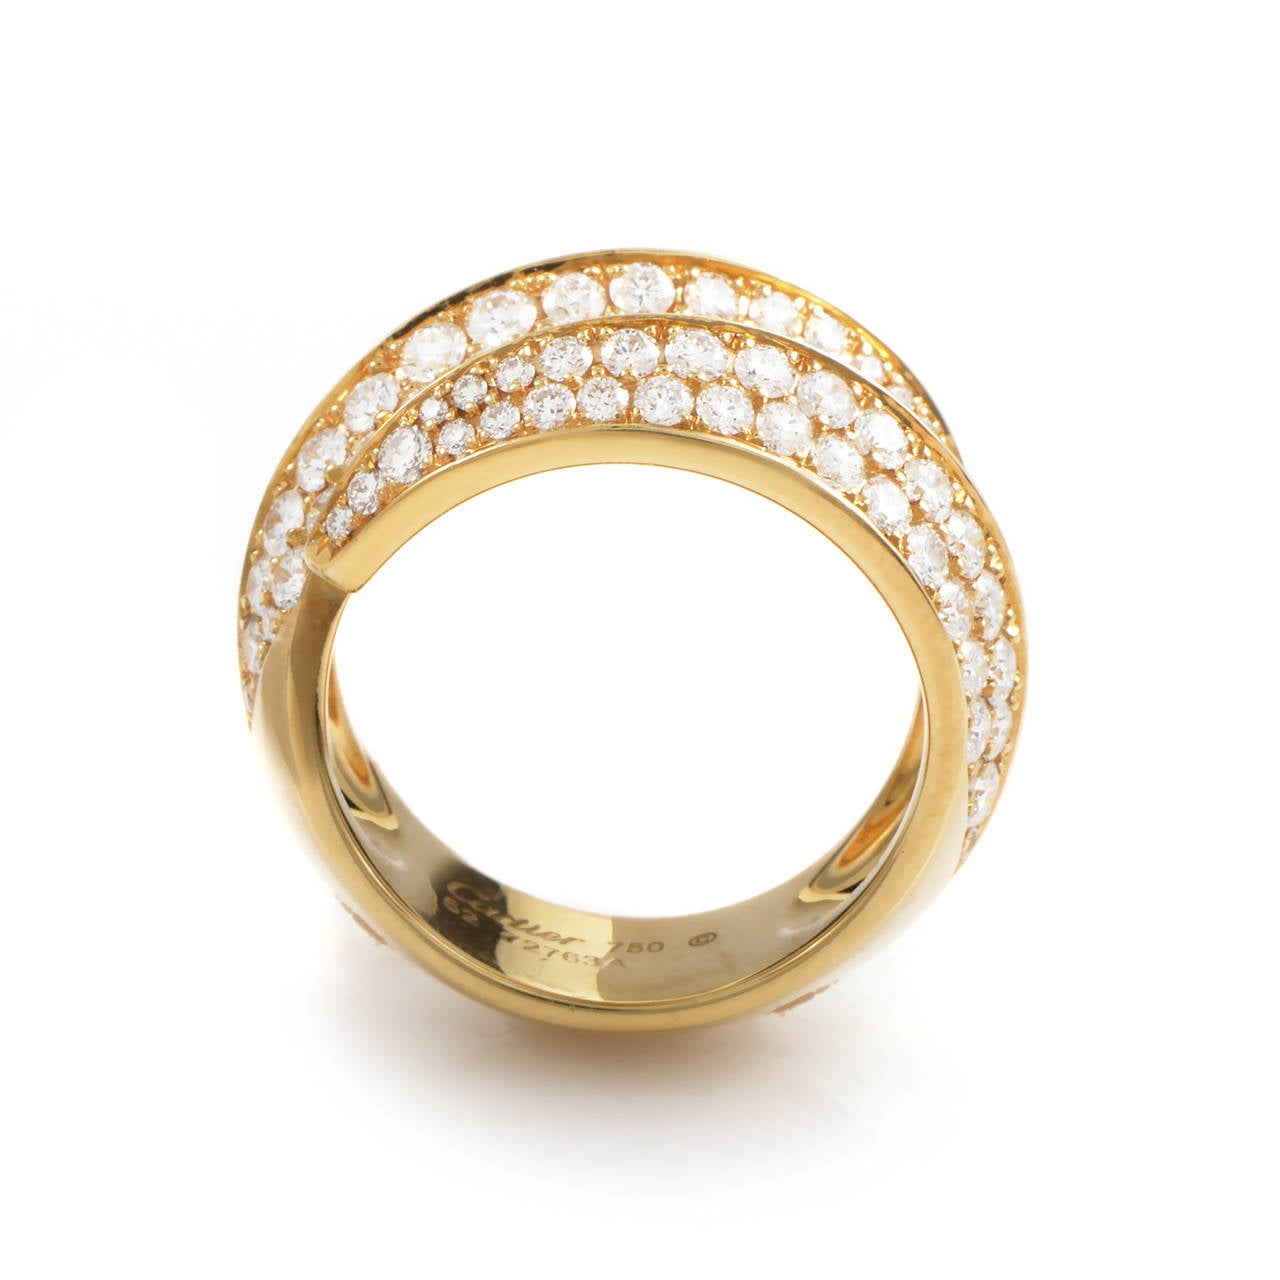 A graceful arc of gold paired with the luxurious shimmer of precious gems makes this Cartier ring a real standout! The ring is made of 18K yellow gold and is set with a 1.60 carat partial diamond pave.
Included Items: Manufacturer's Box
Ring Size: